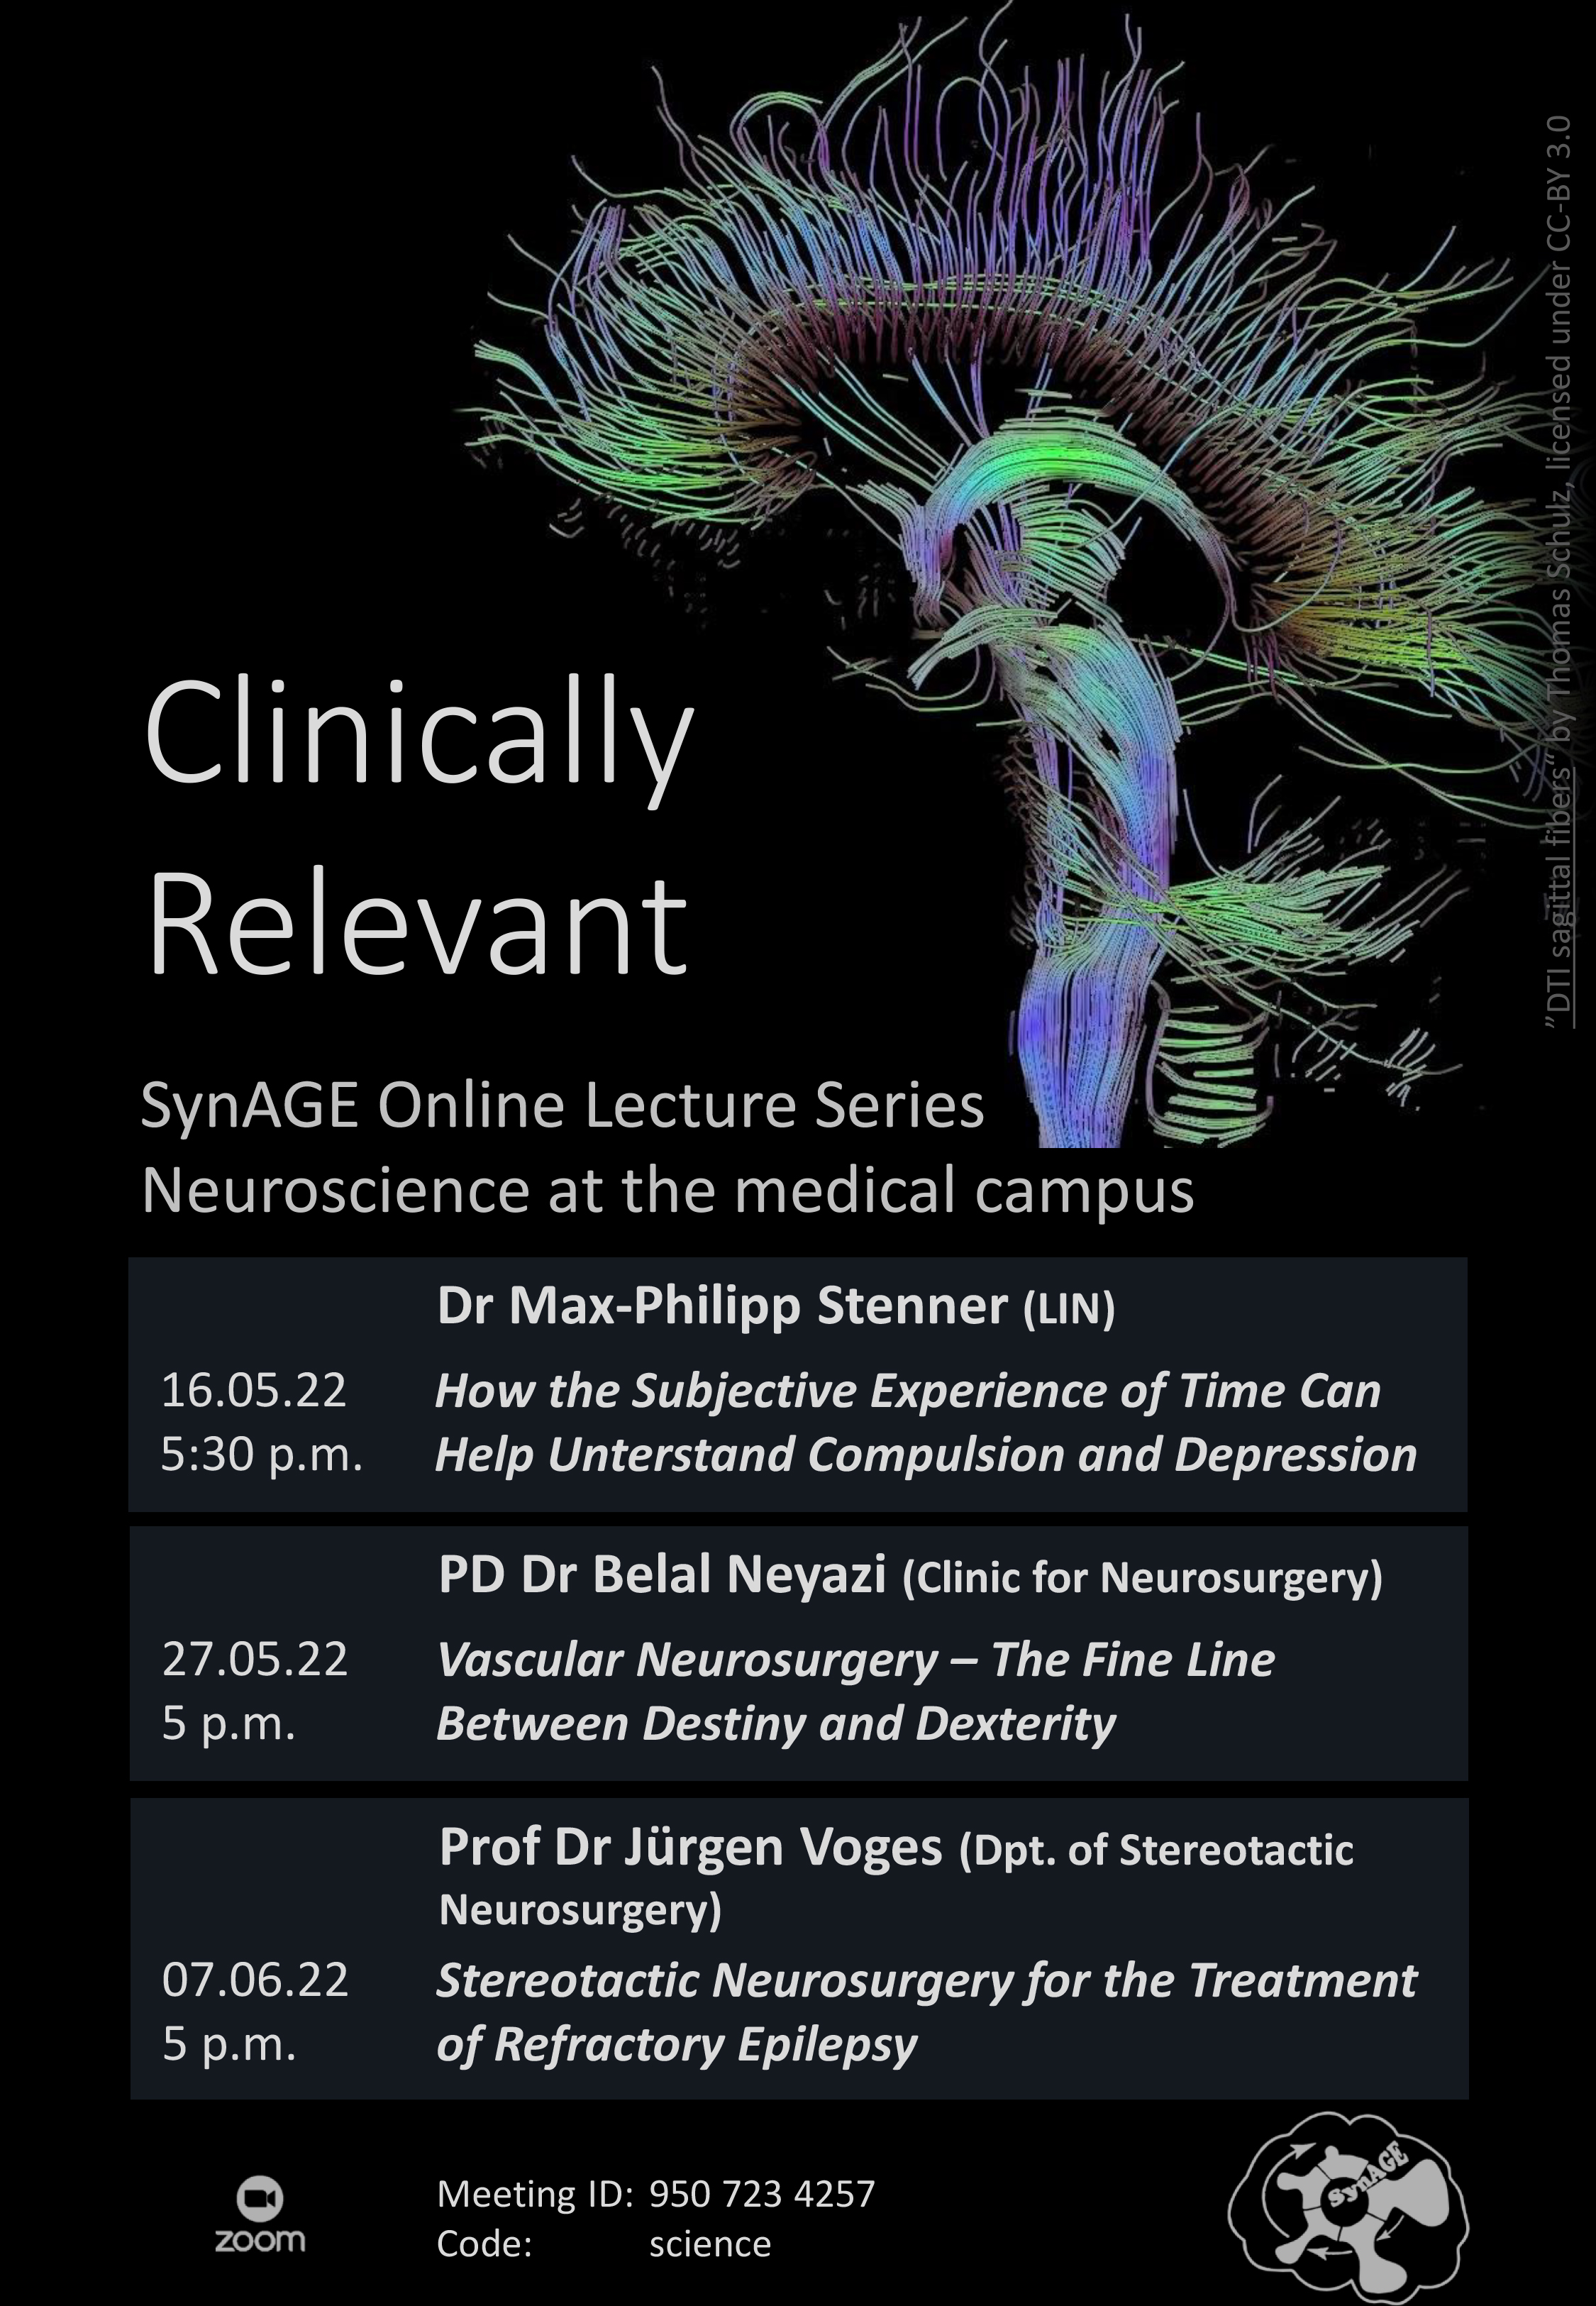 Clinically Relevant Lecture Series: Vascular Neurosurgery – The Fine Line Between Destiny and Dexterity @ online